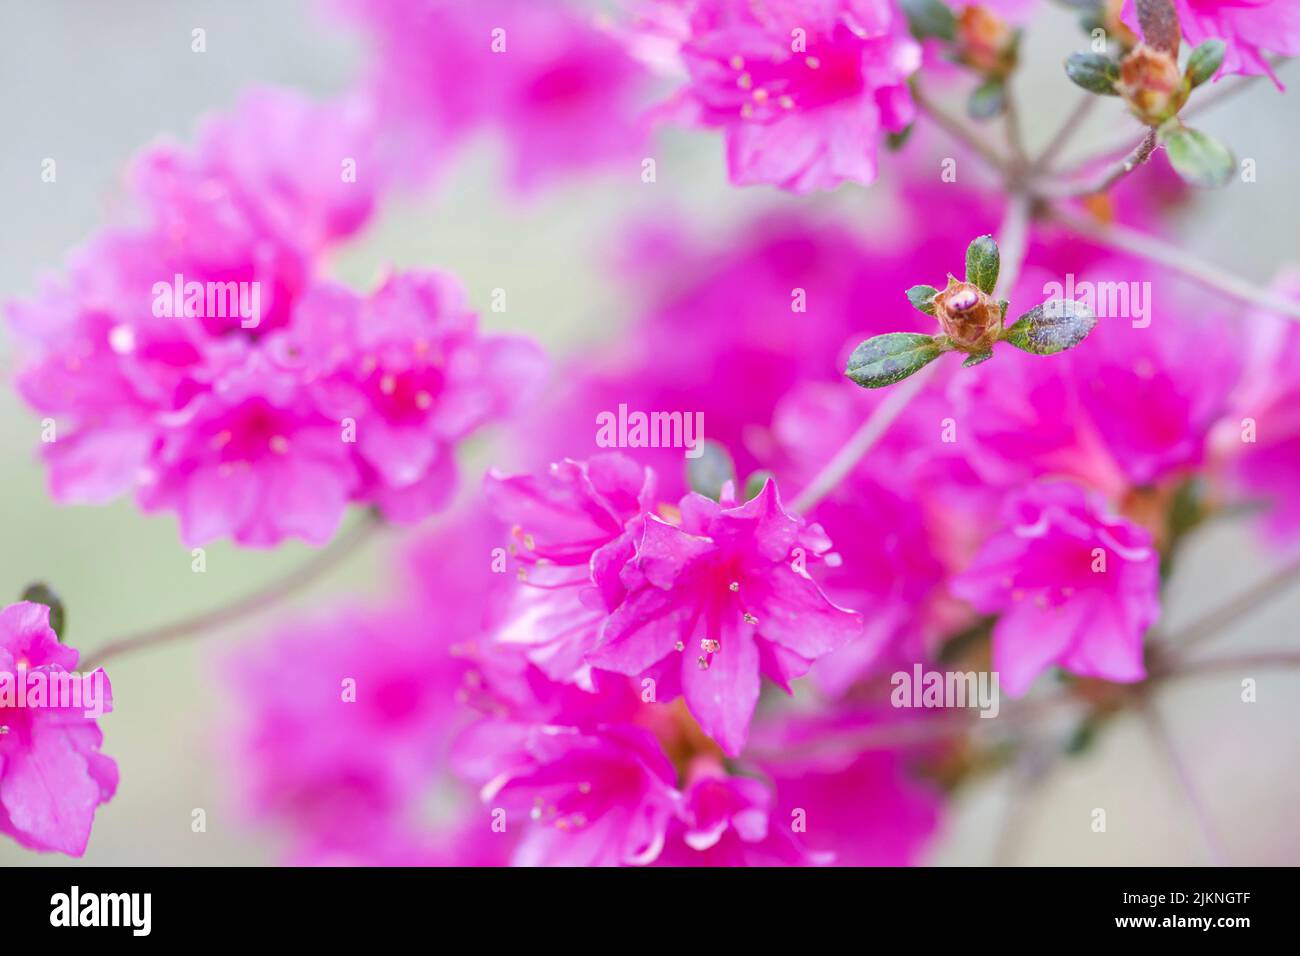 A closeup of a Rhododendron flower Stock Photo